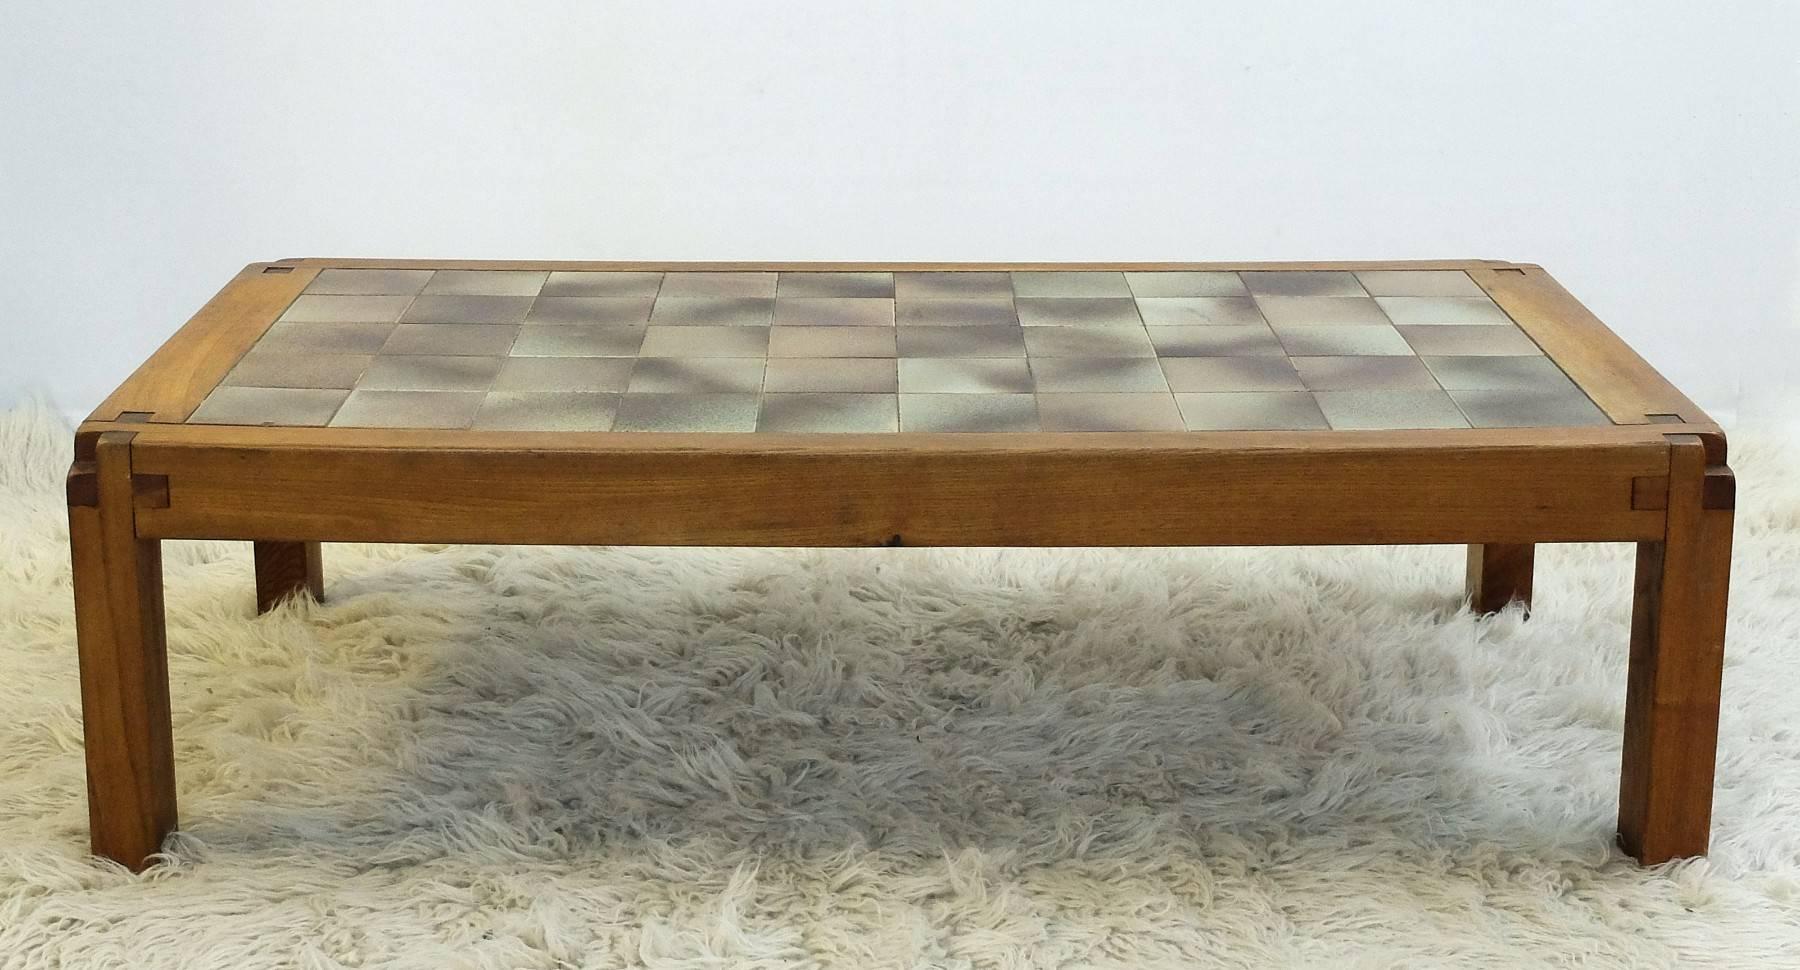 Coffee table in ceramic and elm by French designer Pierre Chapo, circa 1965.

Pierre Chapo (1927-1987) is born in a family of craftsmen. After his regular studies, he worked for some time in the workshop of a navy carpenter. He was graduated